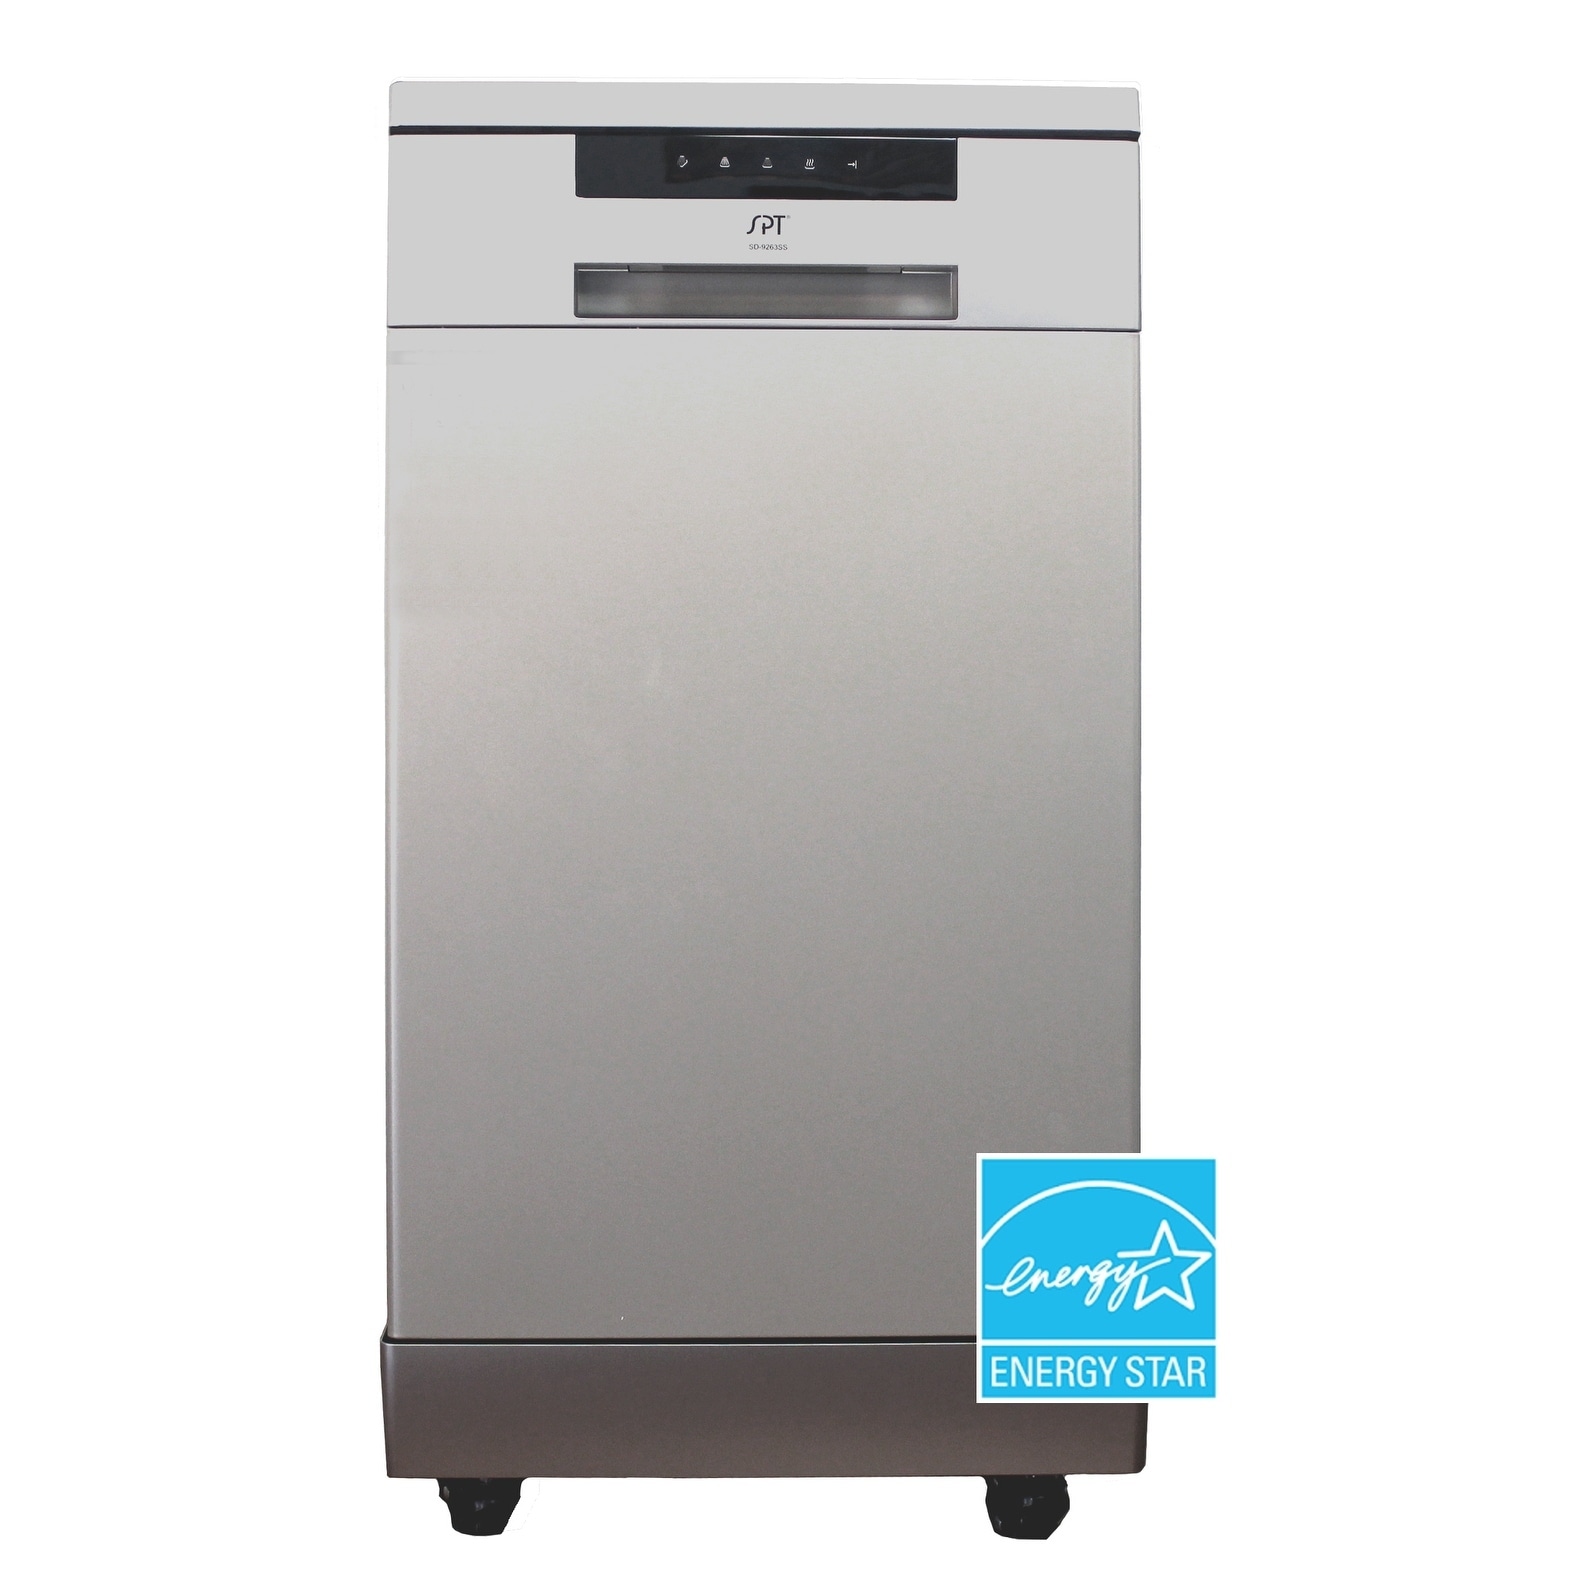 18 inch stainless steel dishwasher